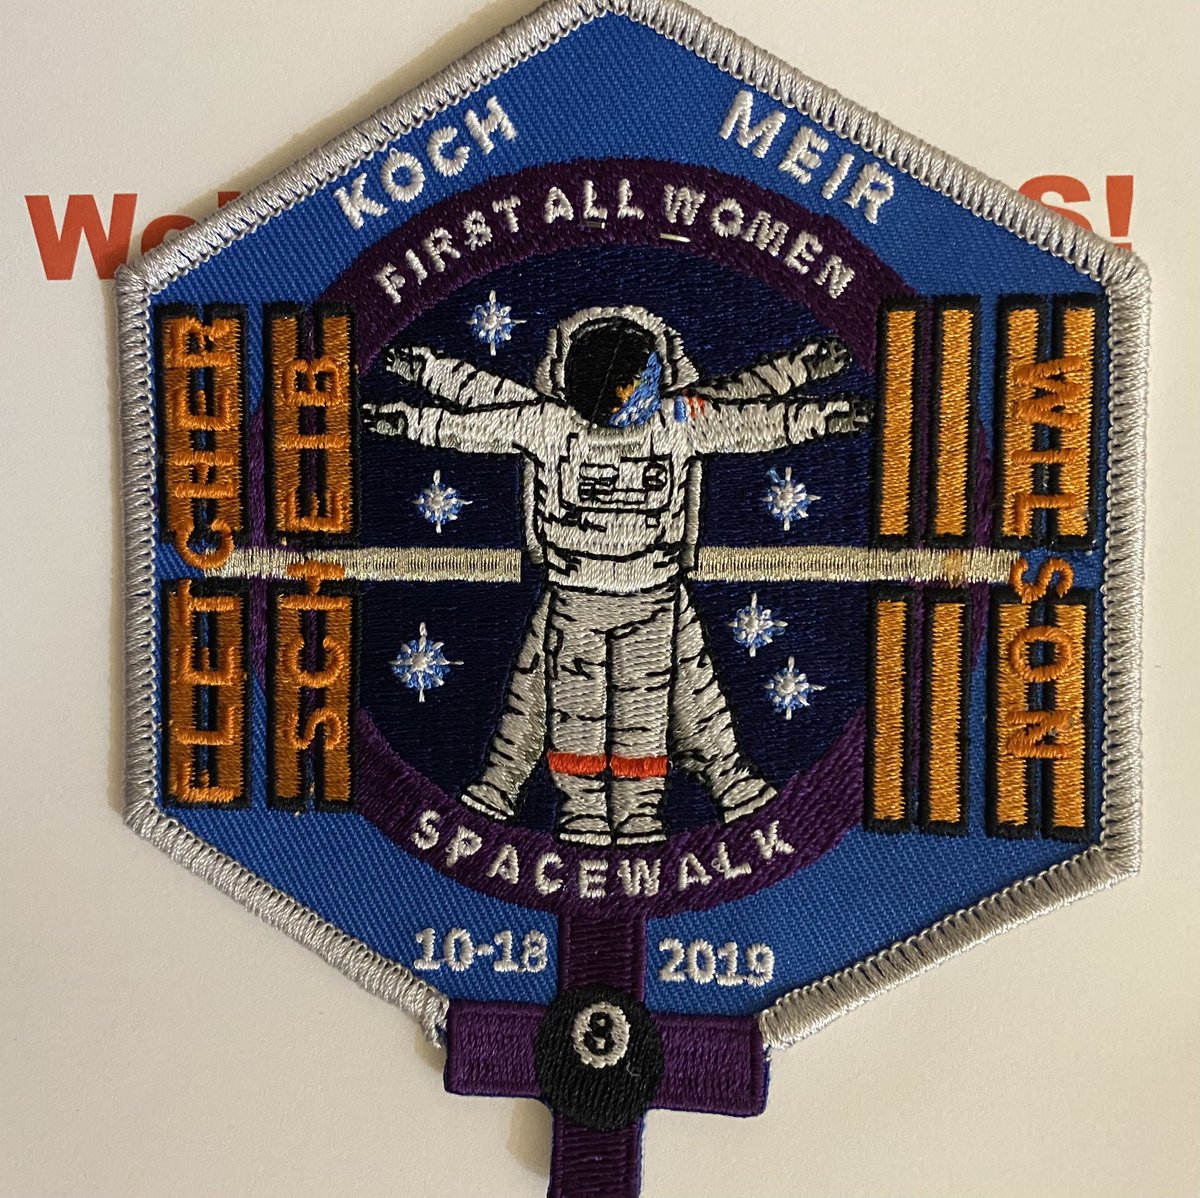 Thank you @nss , your welcome mission patch is amazing!!! 🤩🚀💫 #nationalspacesociety #welcomepatch #membership #becomingspacepolitans